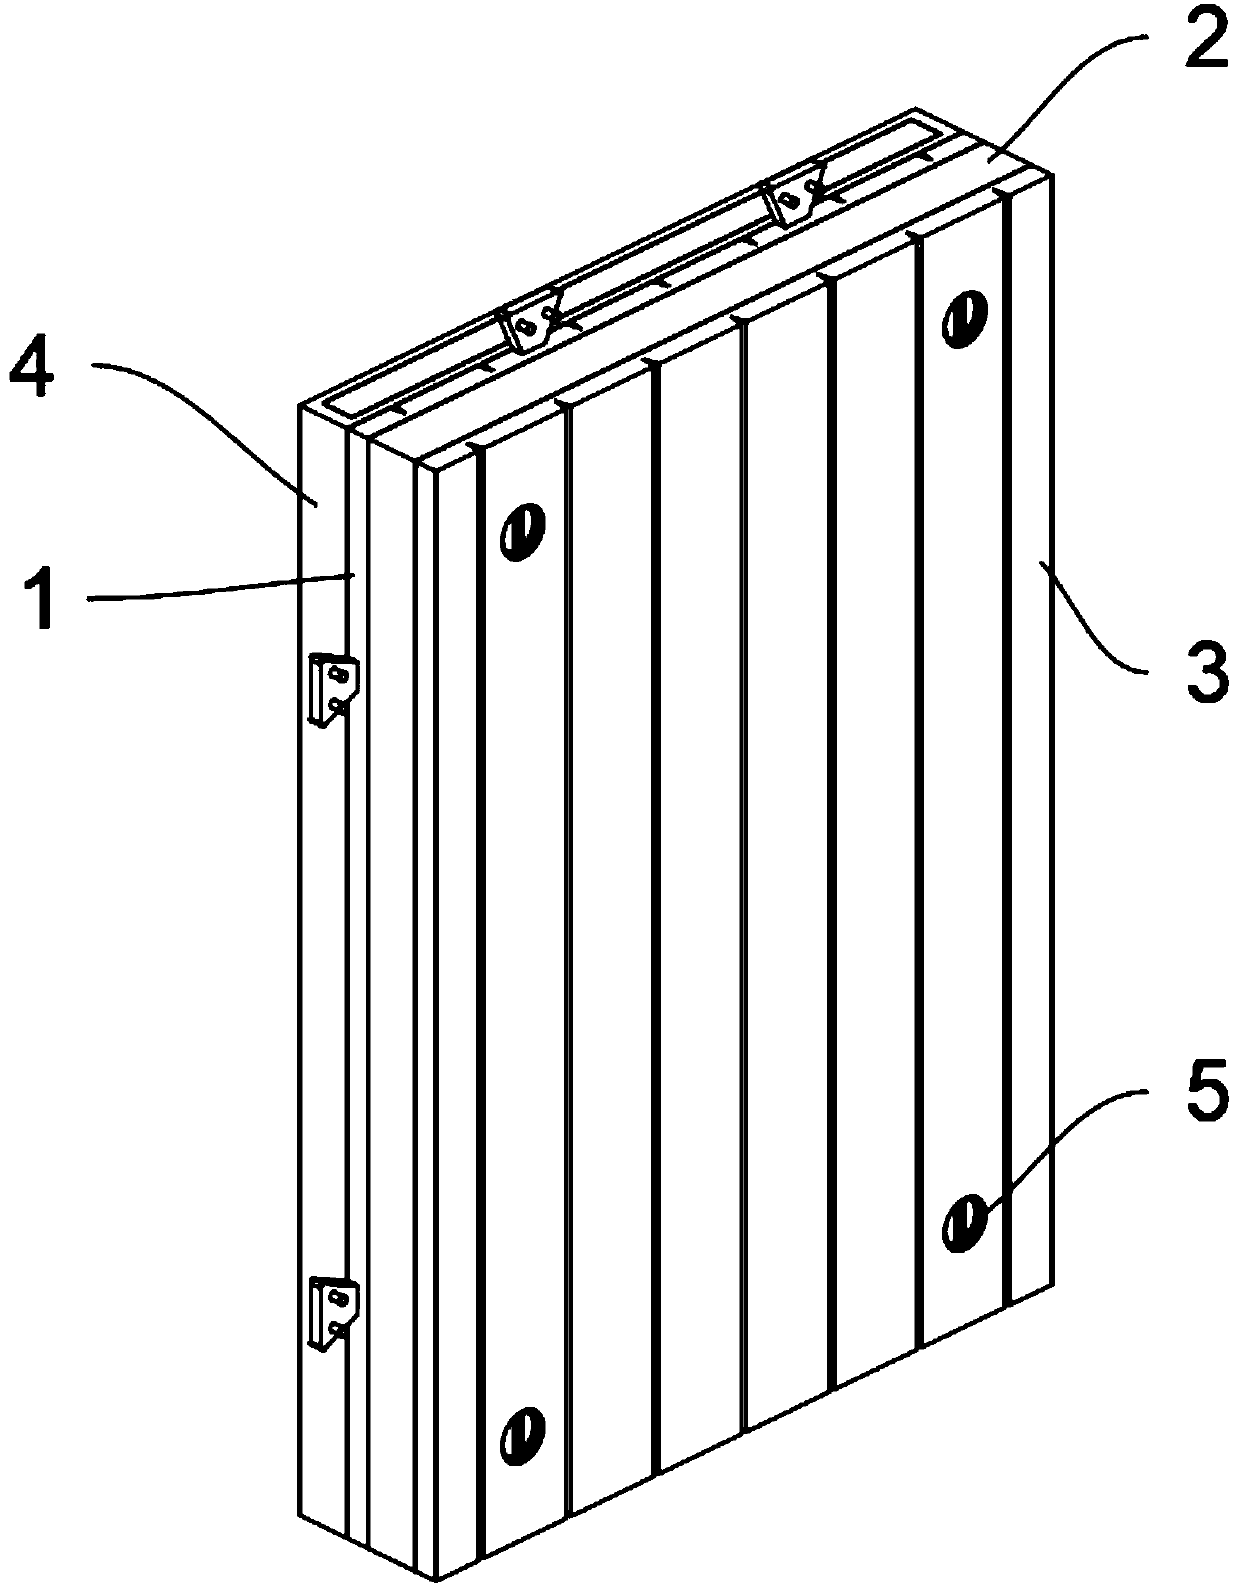 Outer wall insulation board with connecting structure